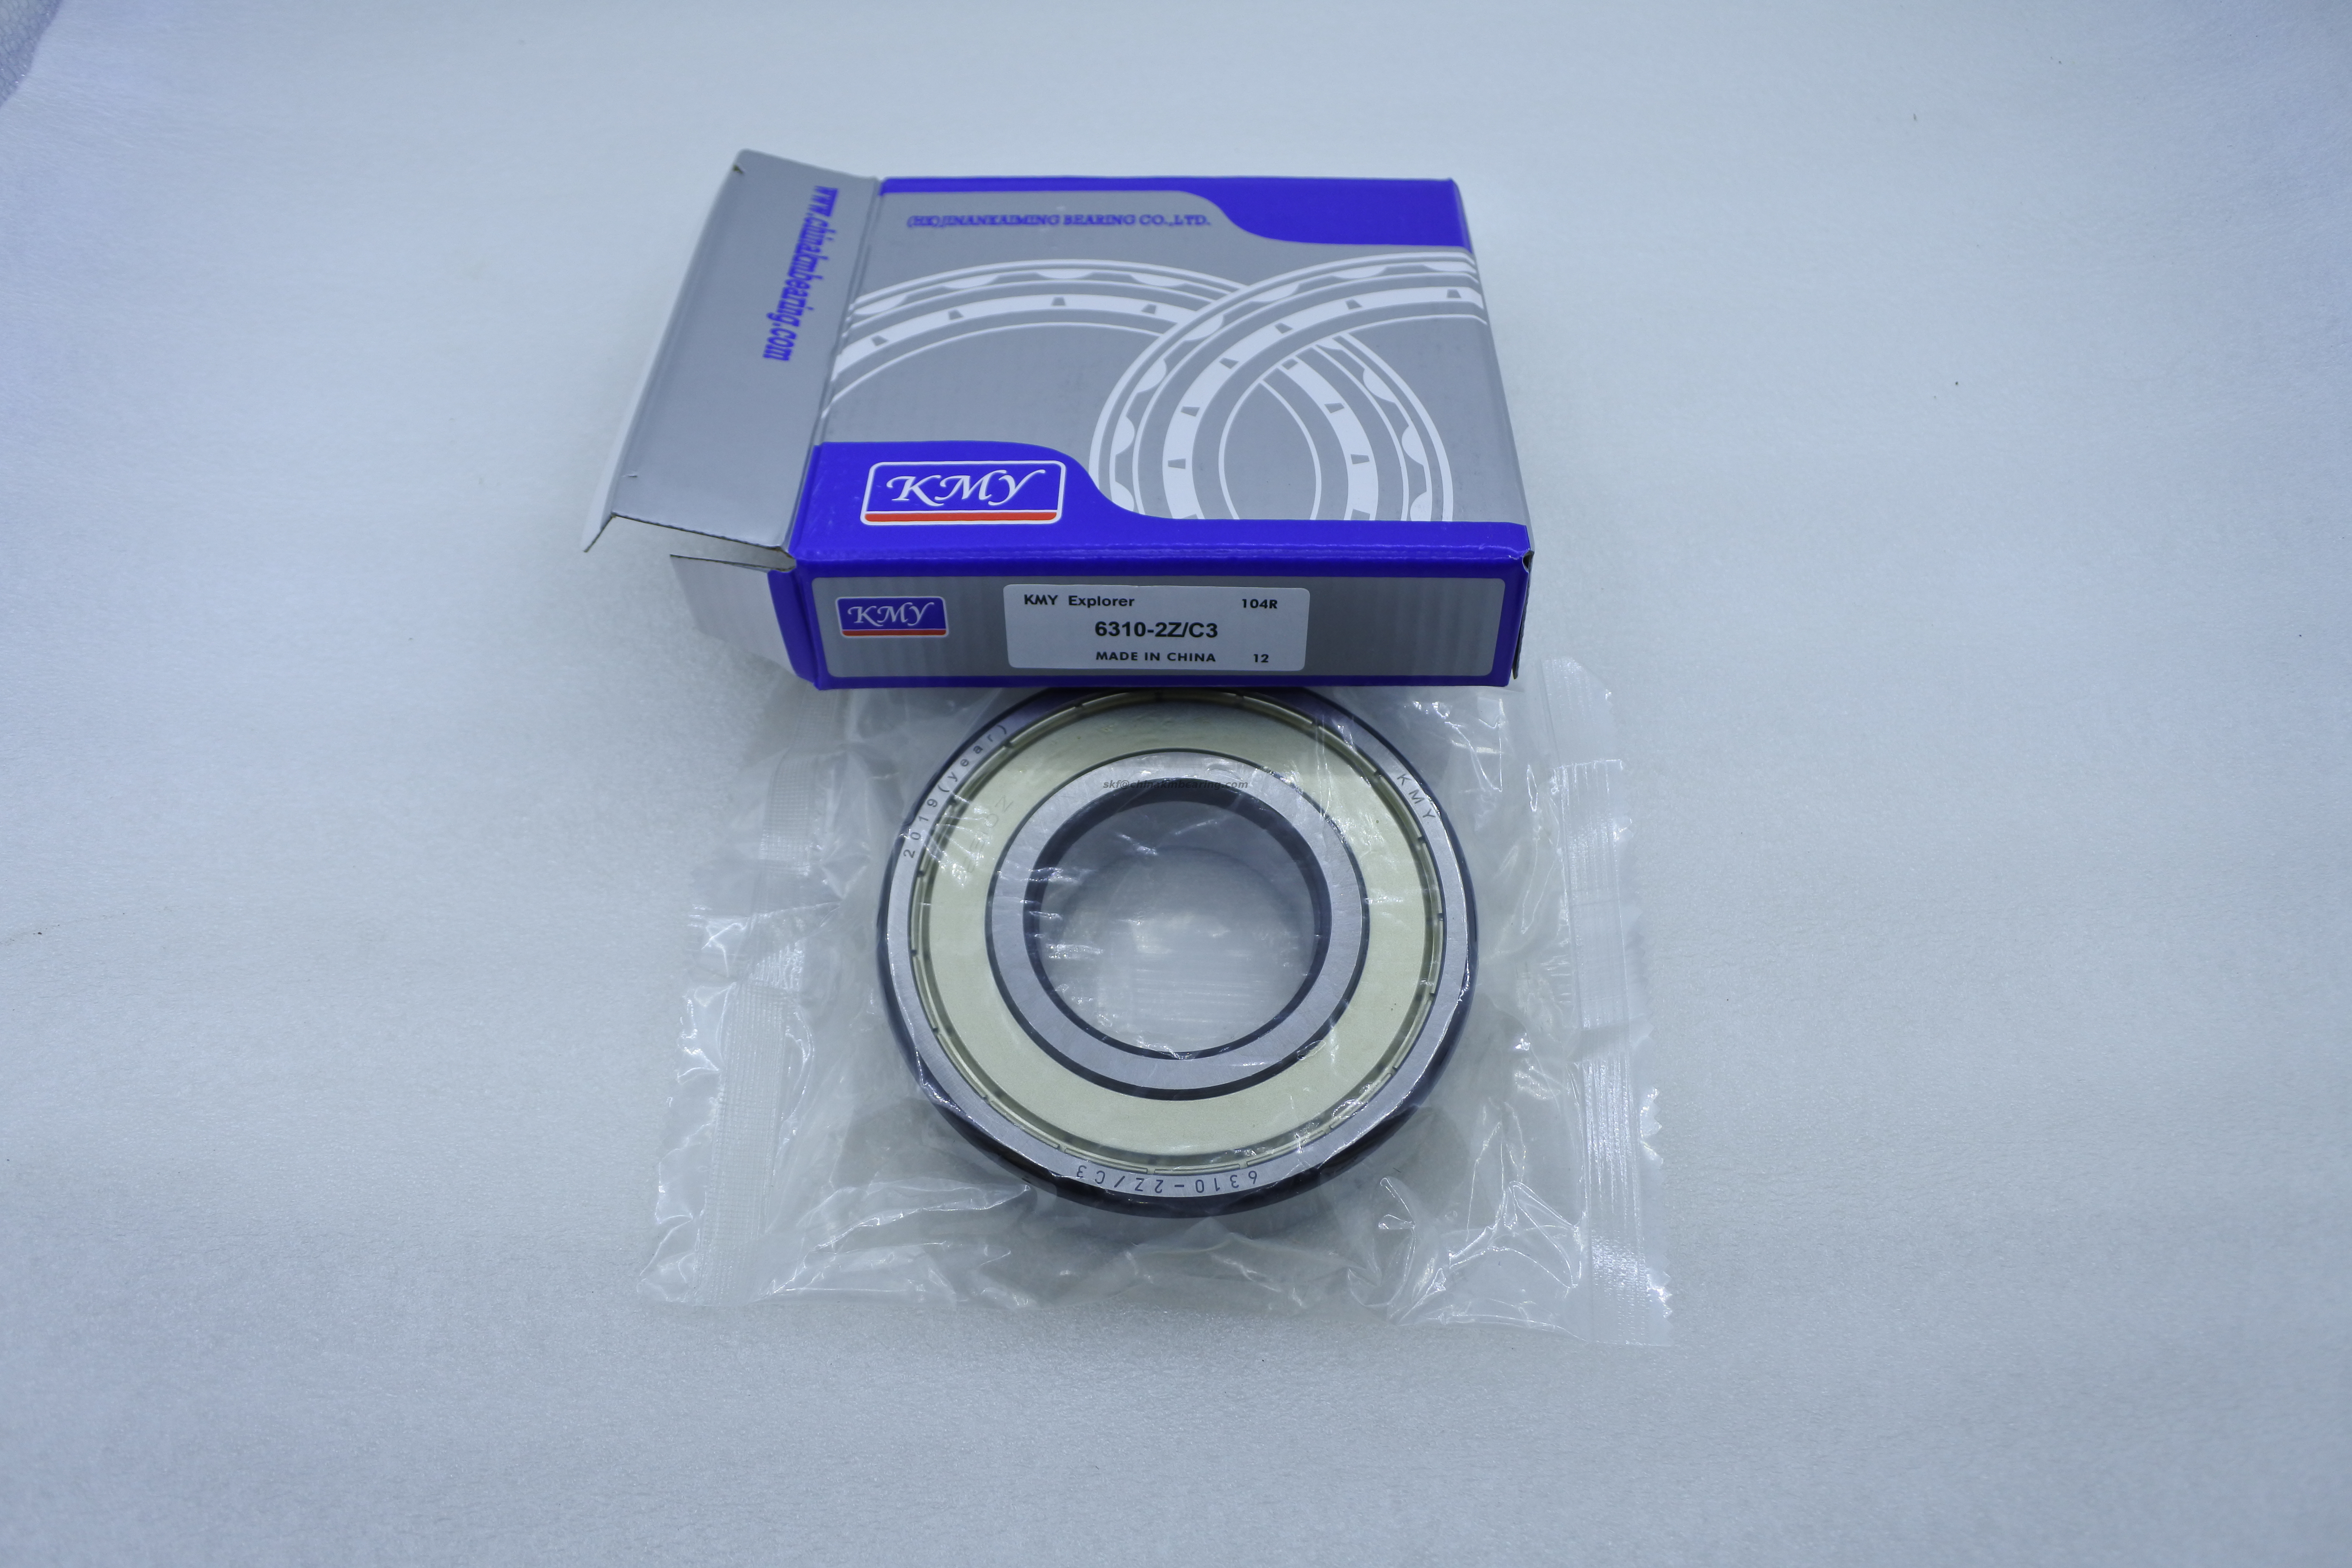 Made in china high temperature 6308-2RZ price deep groove ball bearing